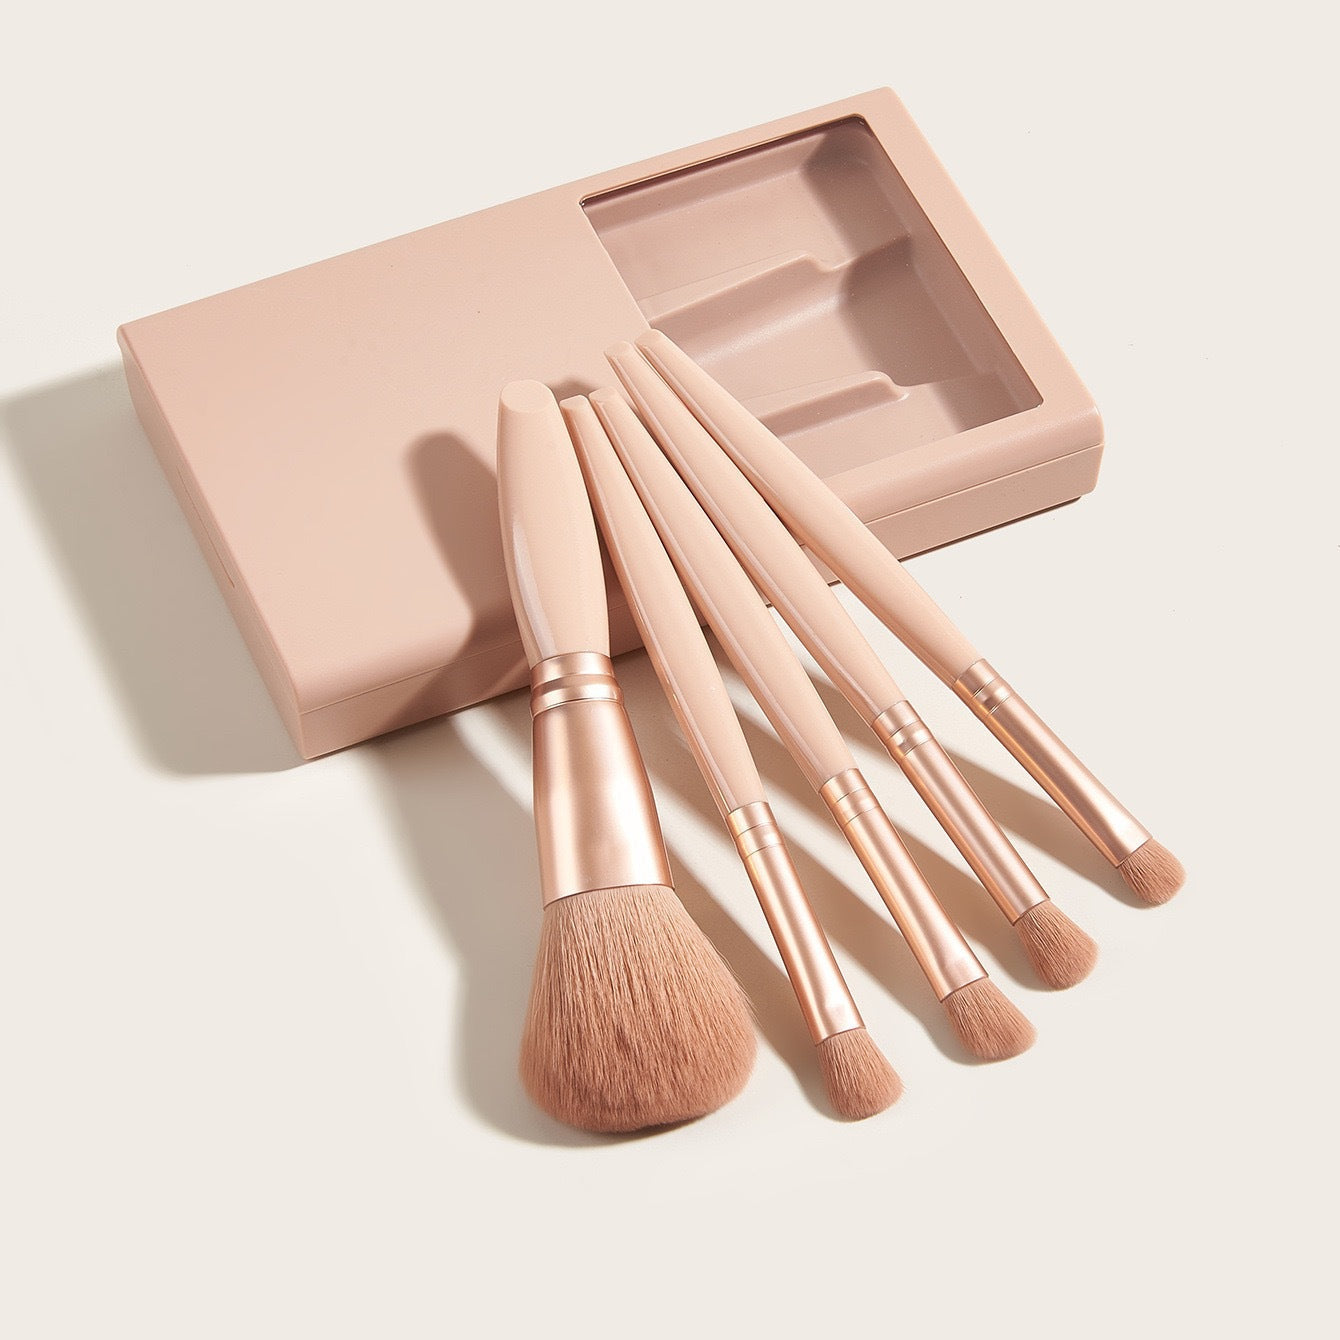 5-Piece Travel Makeup Brushes with Mirror Set: Portable Beauty On-the-Go LA ROSE BEAUTY